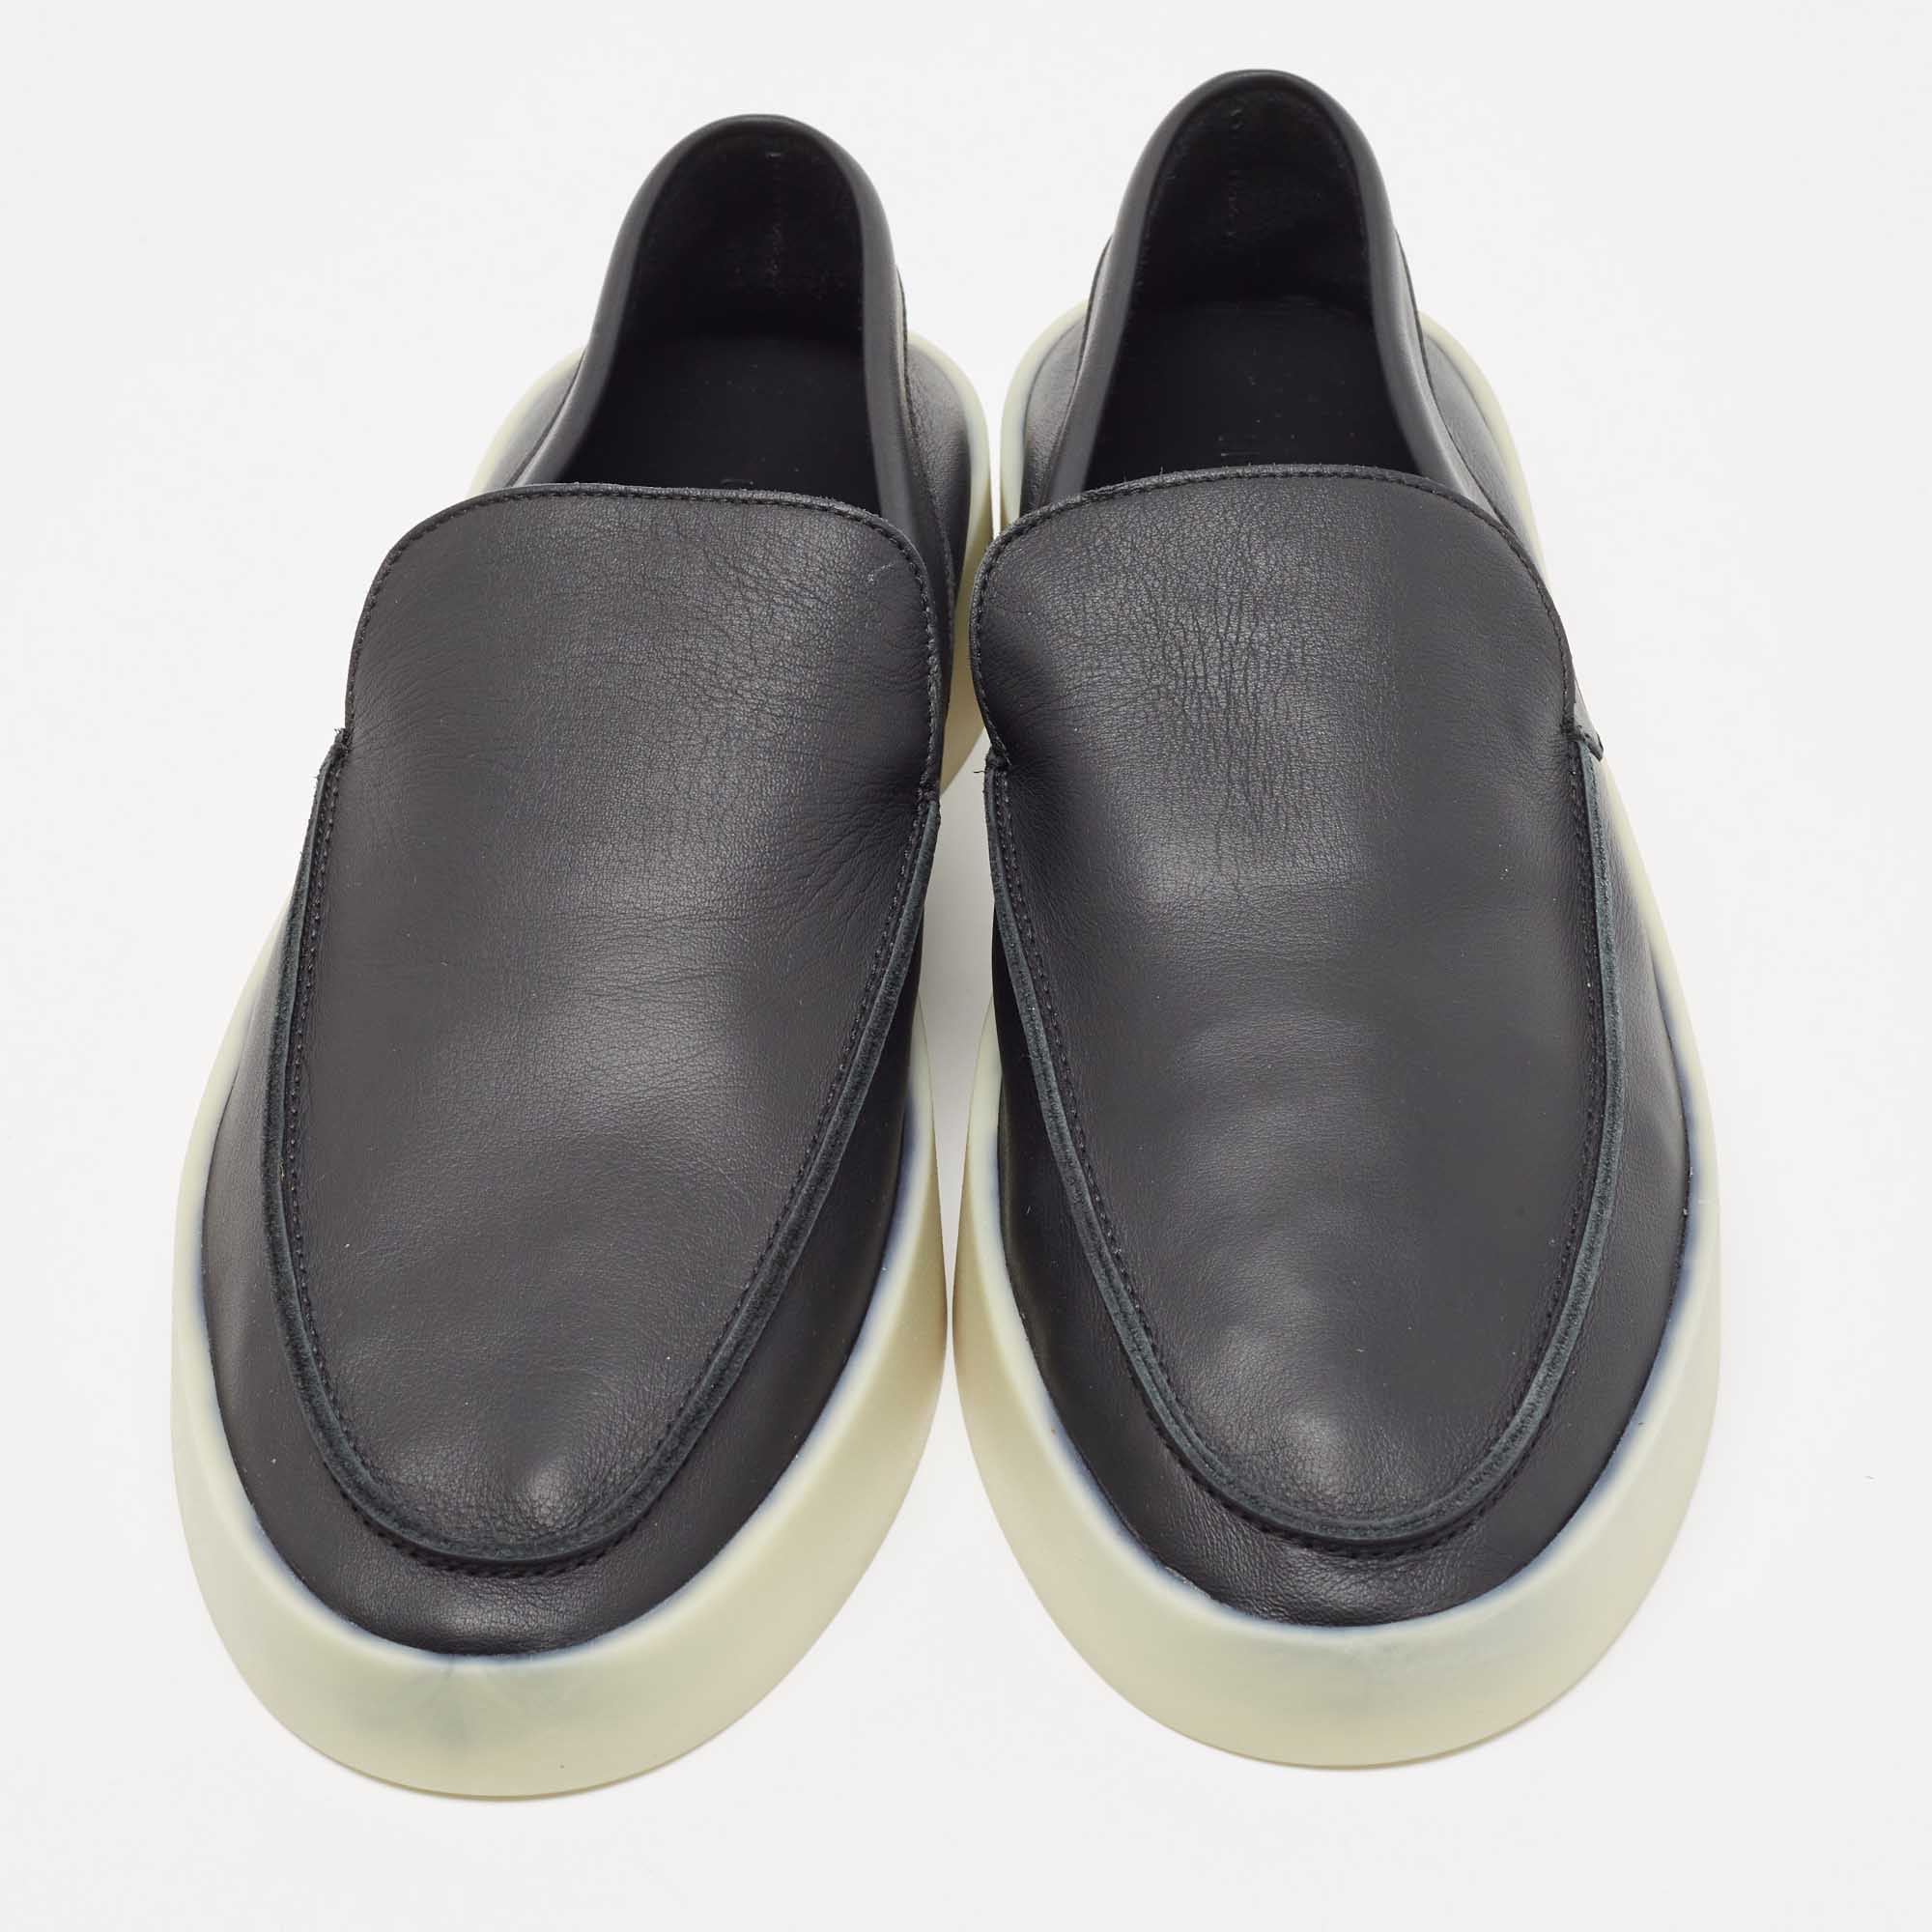 Fear Of God Black Leather Slip On Sneakers Size 46